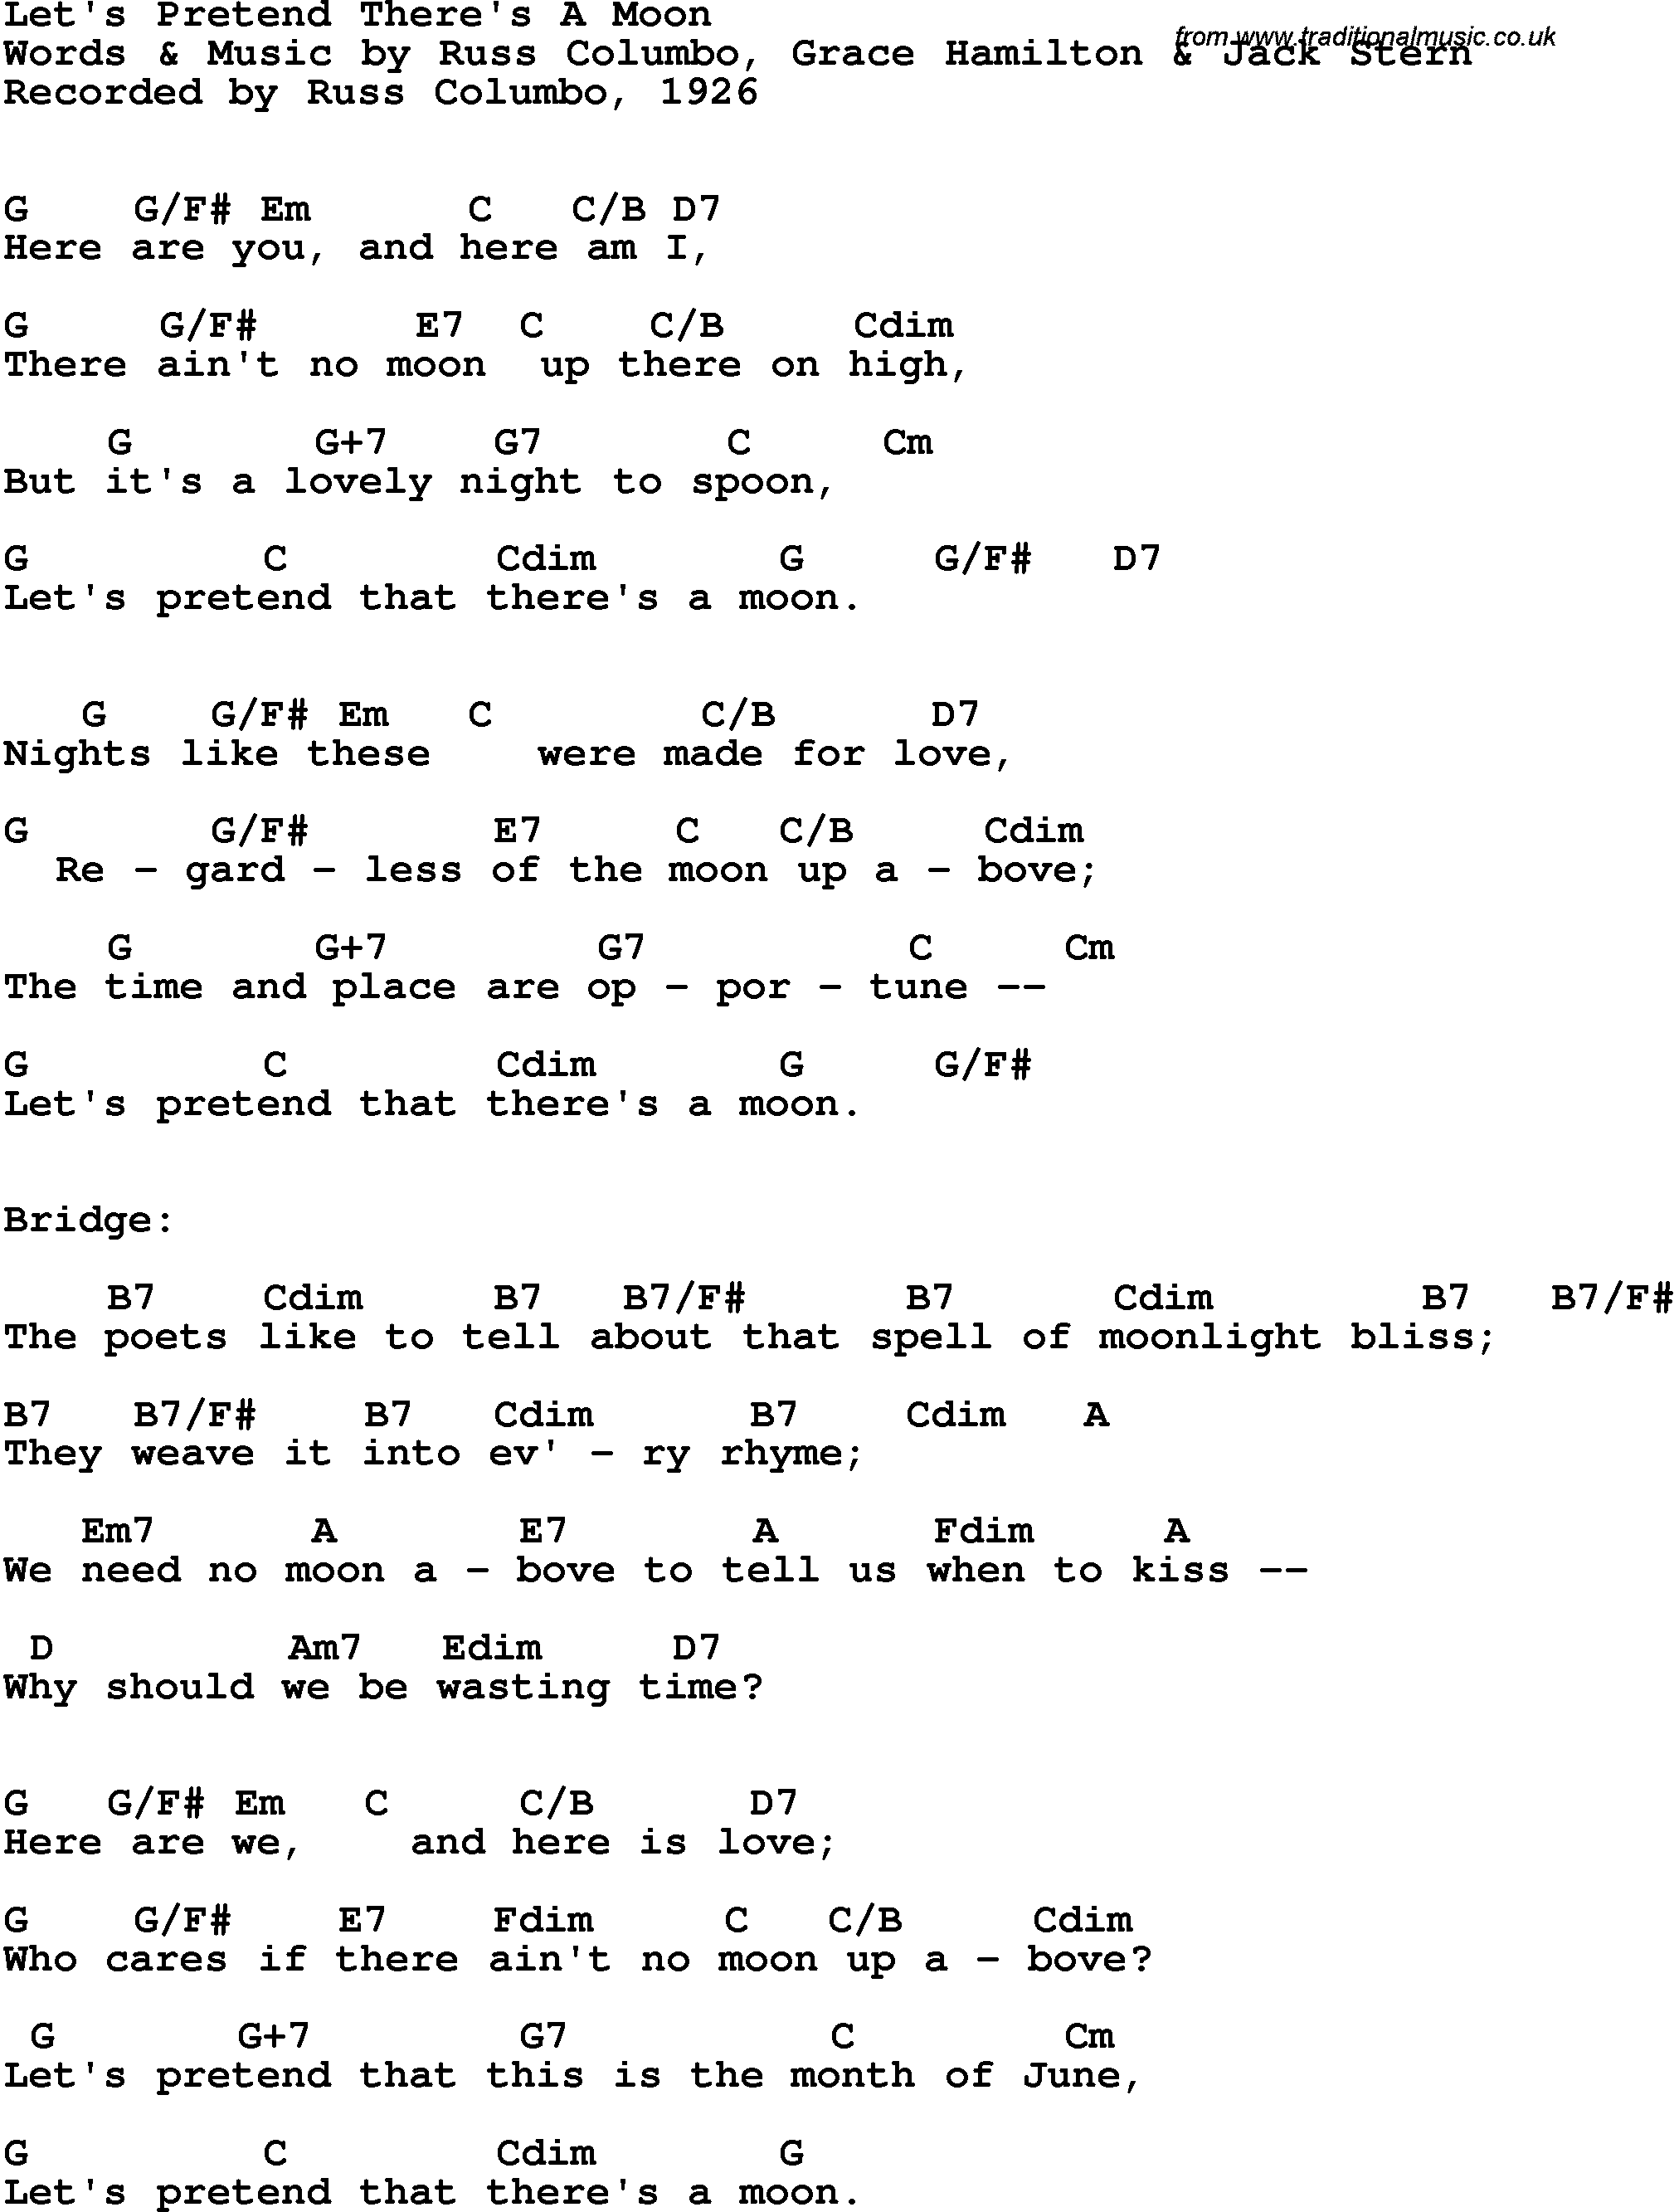 Song Lyrics with guitar chords for Let's Pretend There's A Moon - Russ Columbo, 1926